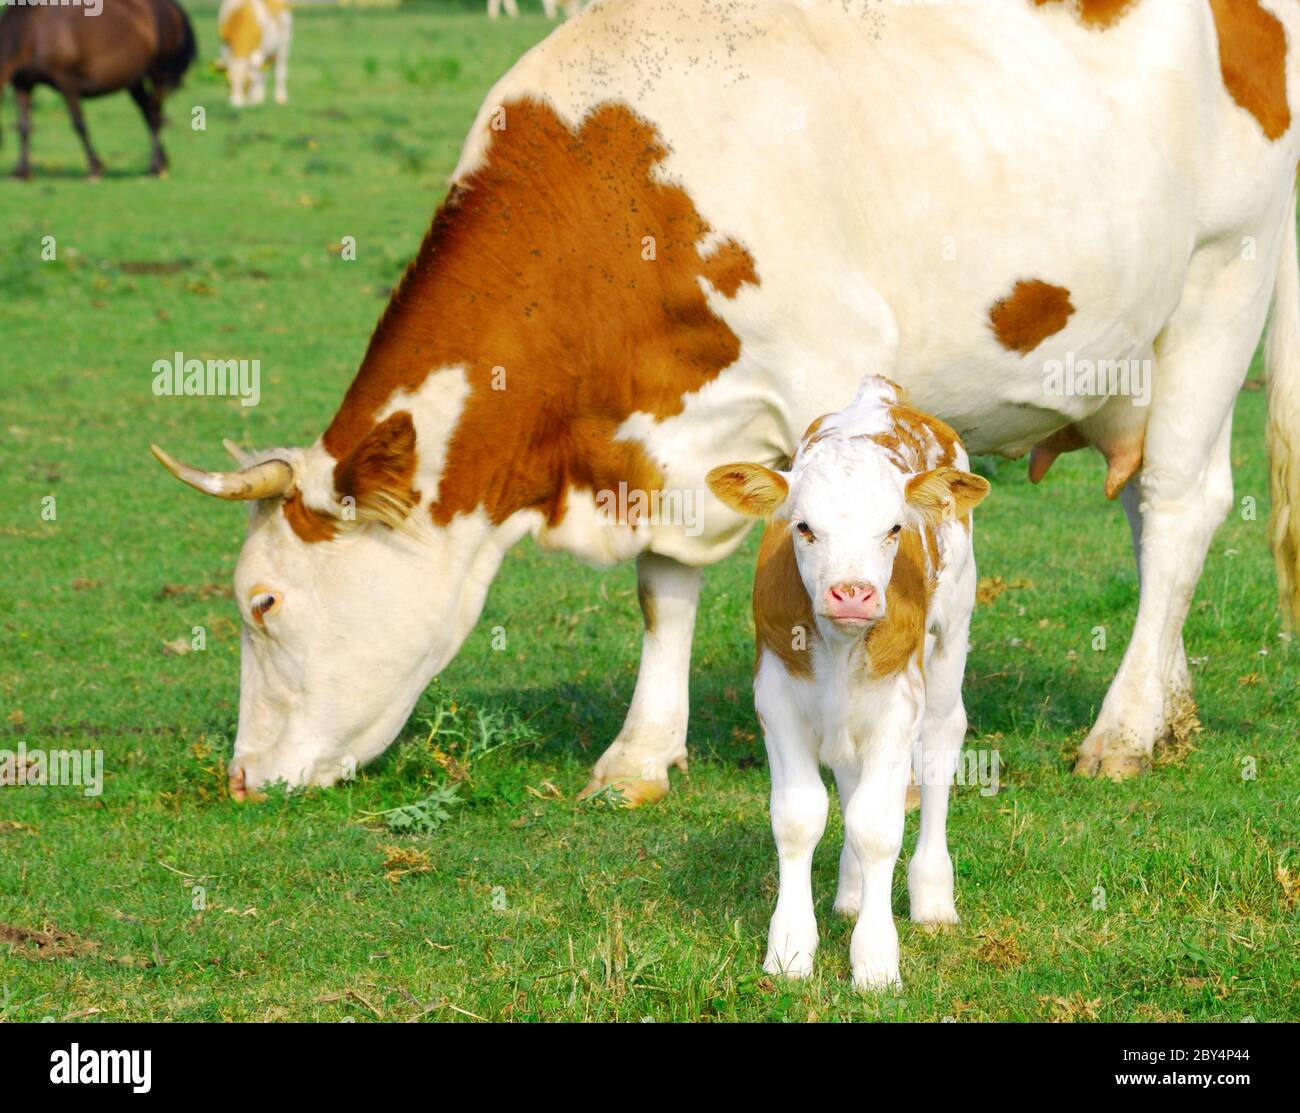 Cow Calf Next To Its Grazing Mother Stock Photo Alamy